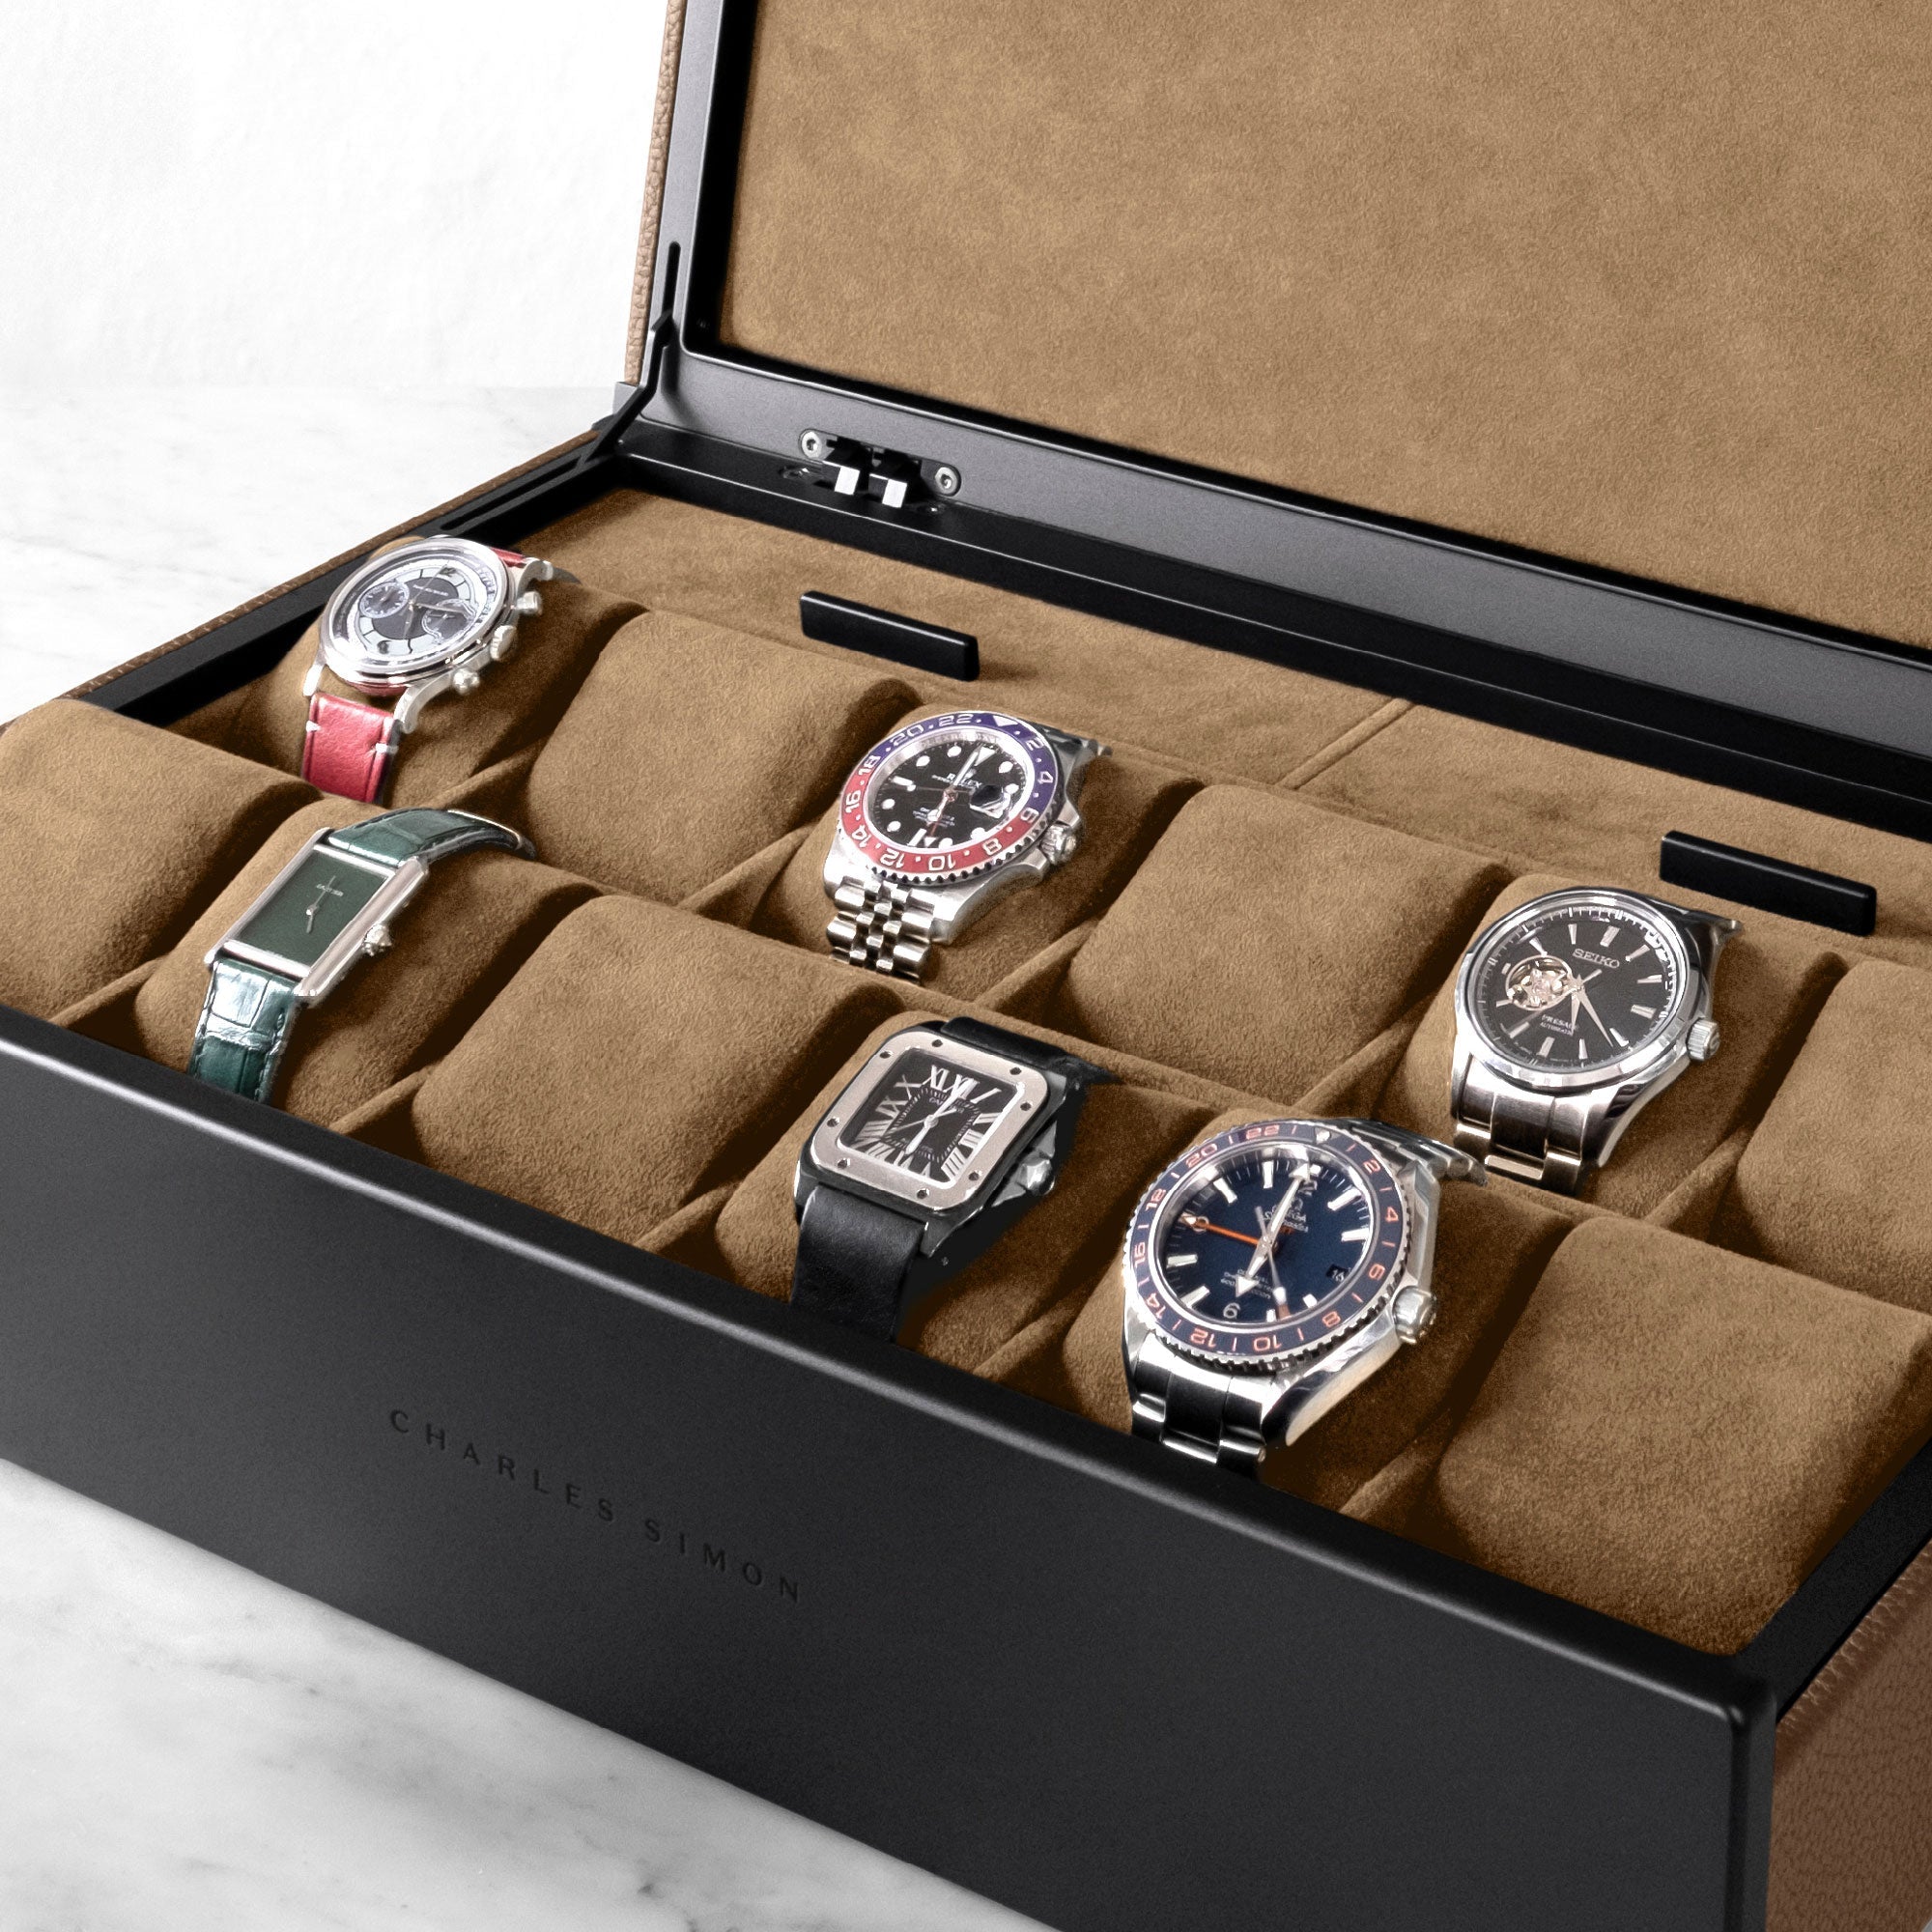 Luxury watches displayed in tan leather and camel Alcantara Spence 12 luxury Watch box.